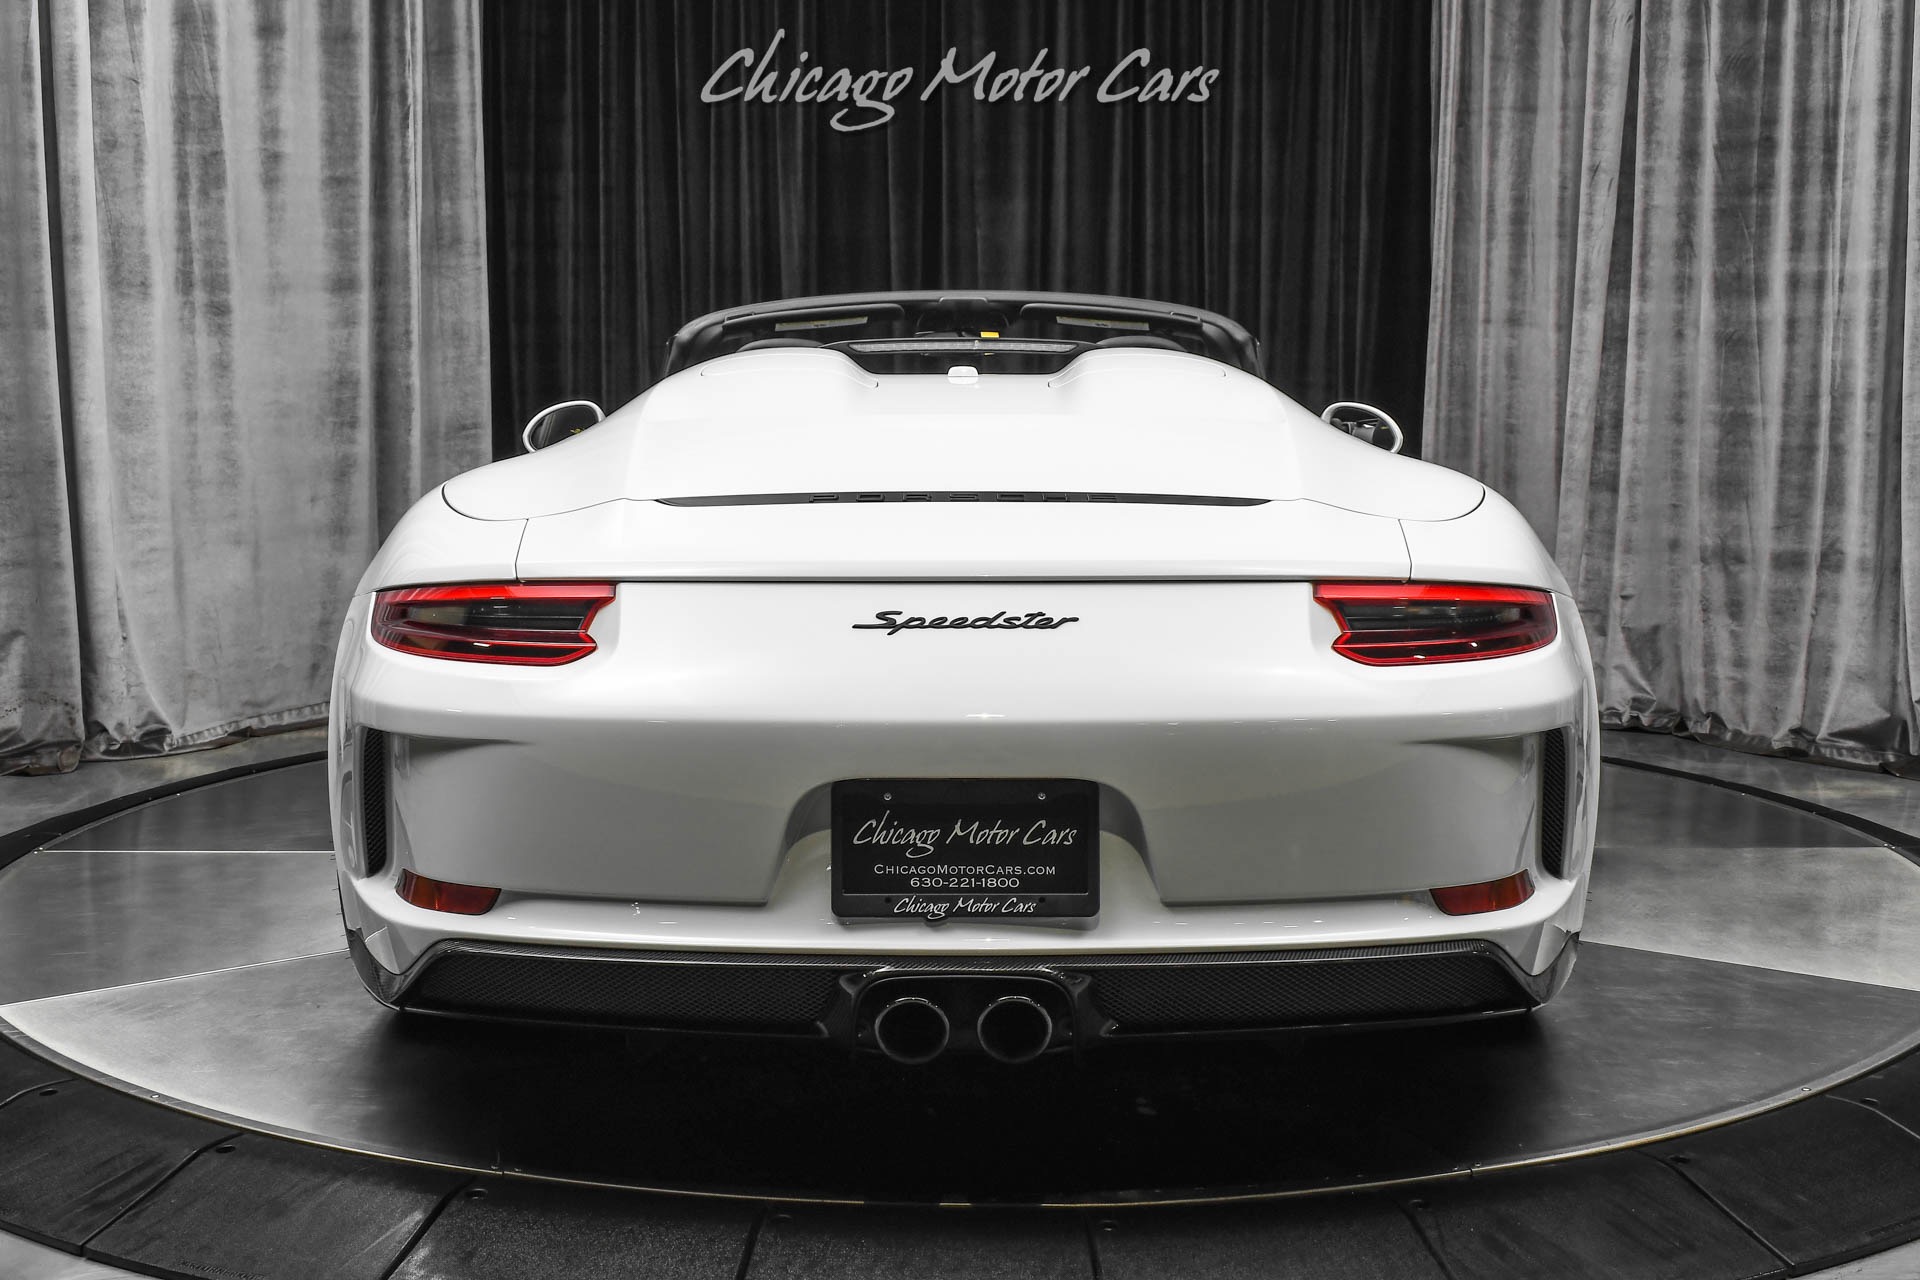 Used-2019-Porsche-911-Speedster-Convertible-LOW-Miles-Front-Lift-Chrono-6-Speed-Manual--563